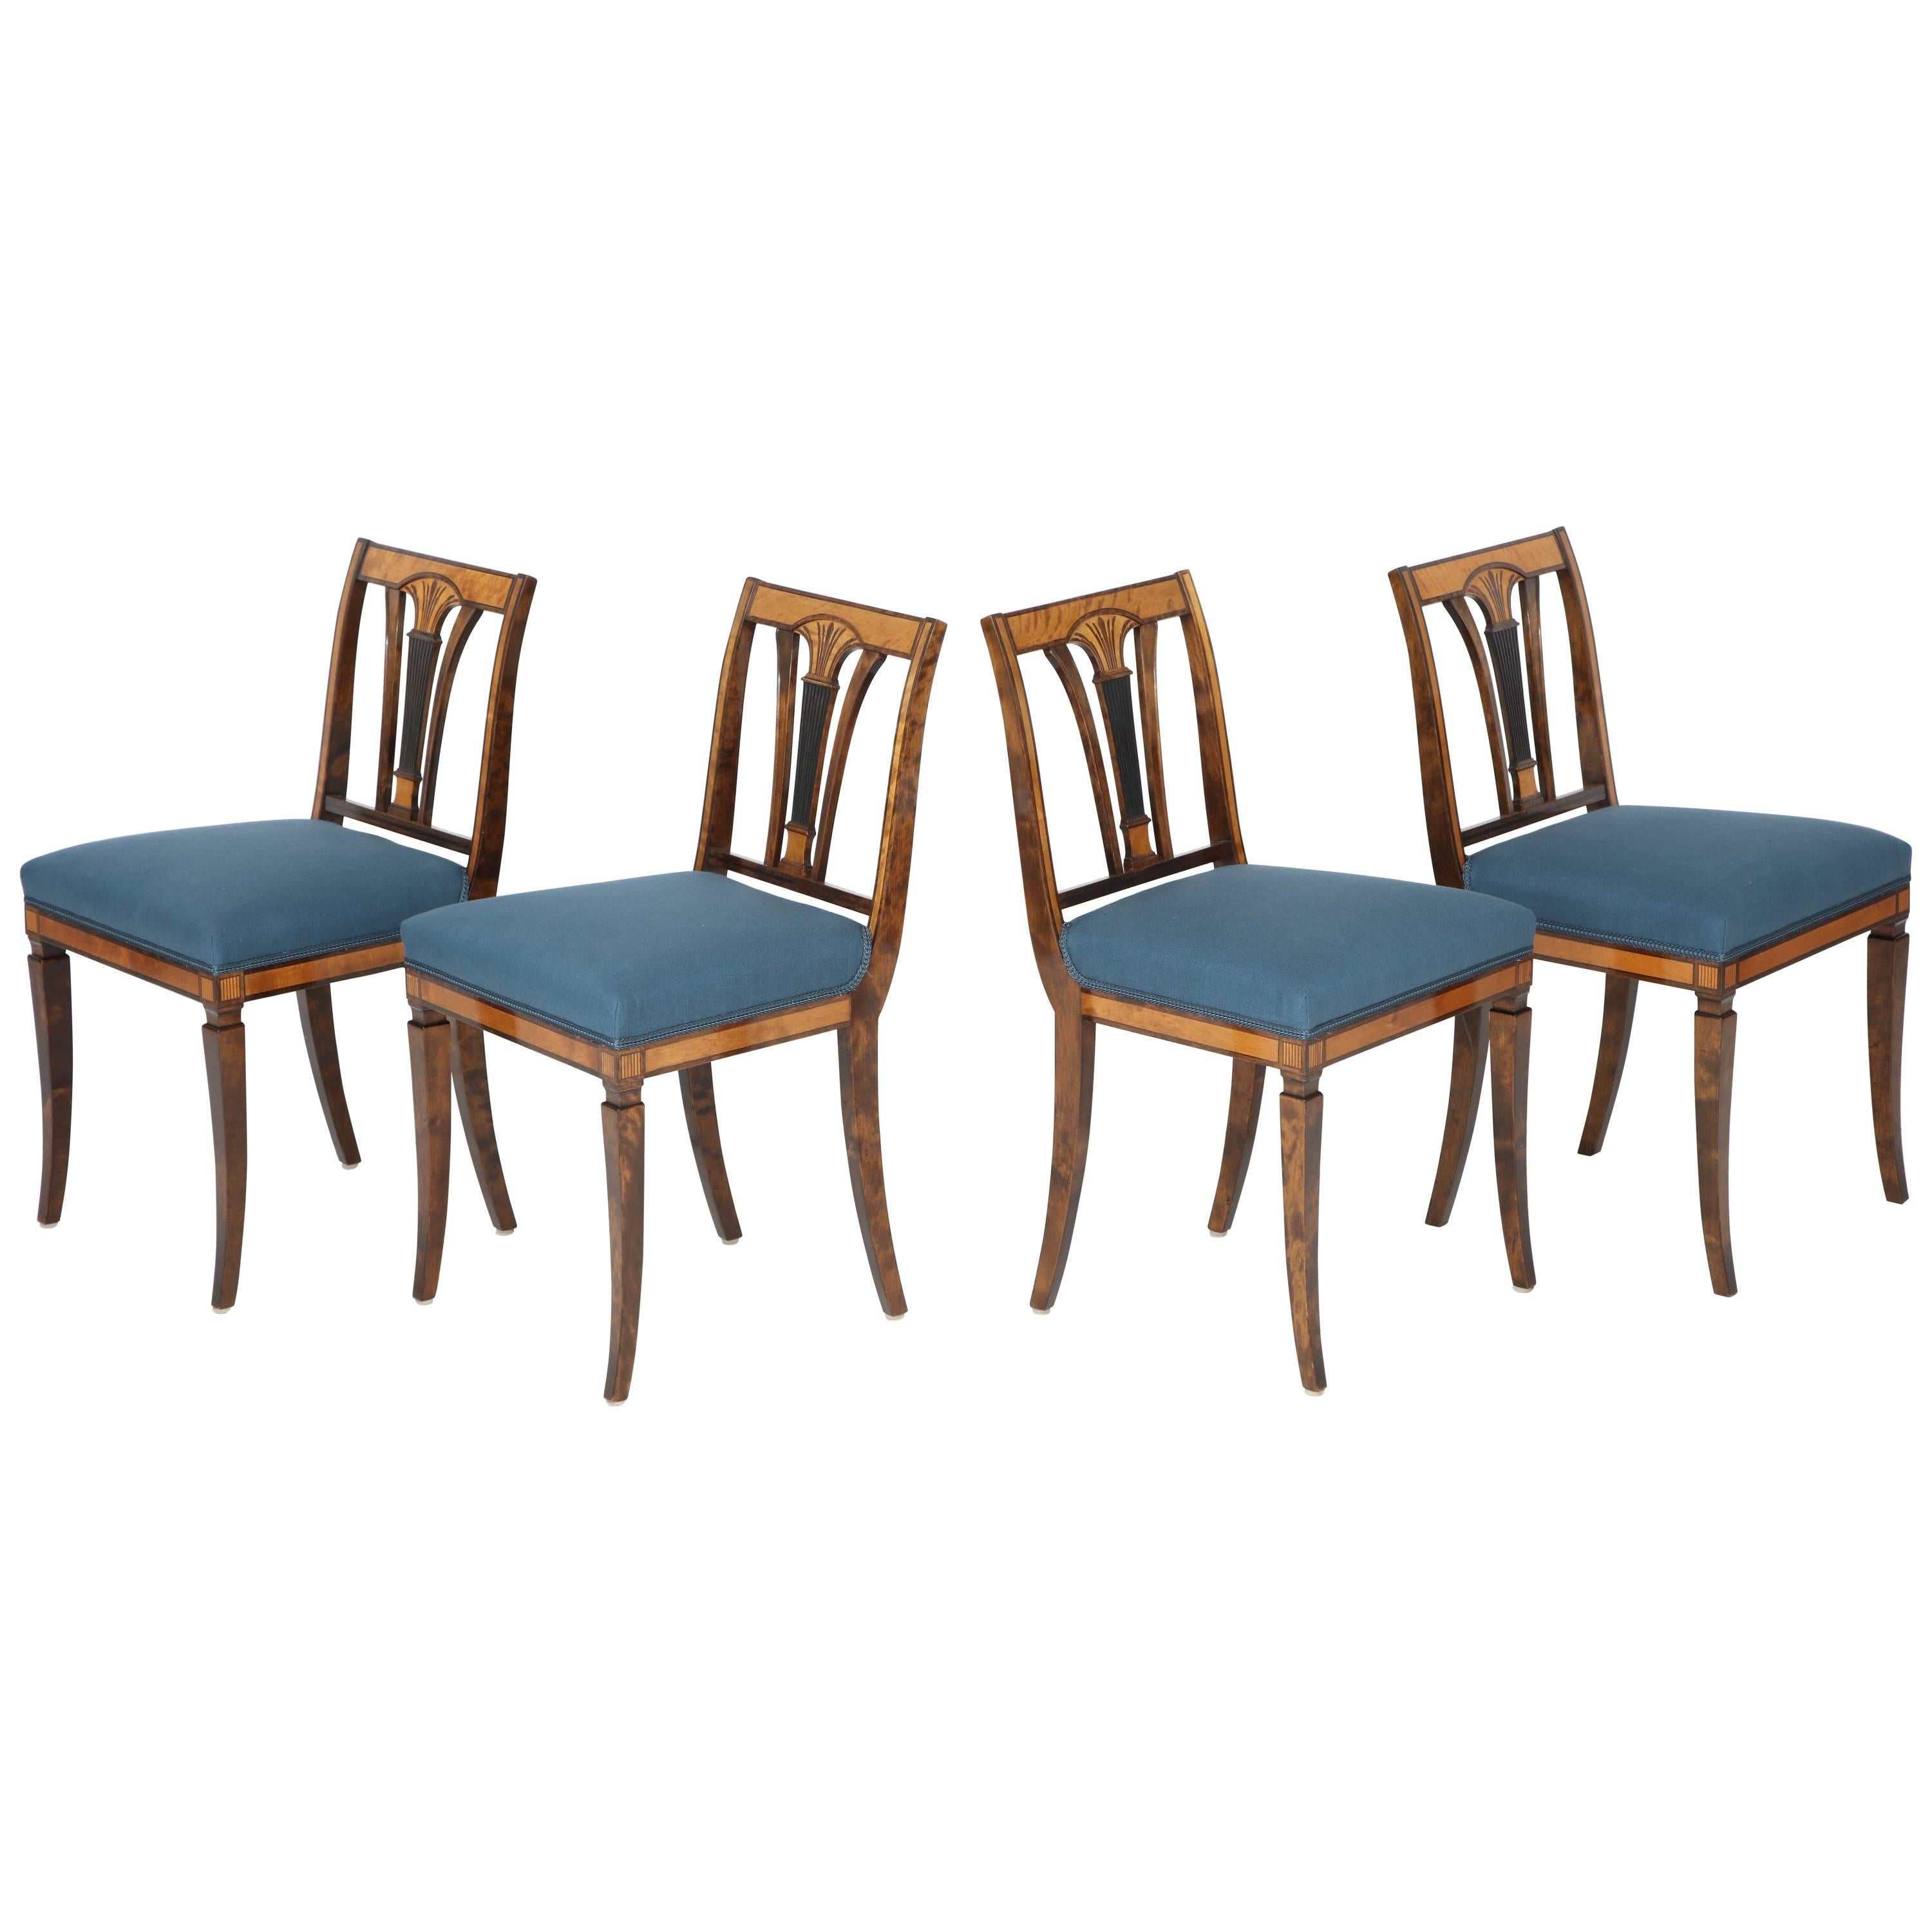 Set of Four Swedish Birch and Stained Birch Side Chairs, circa 1930-1940